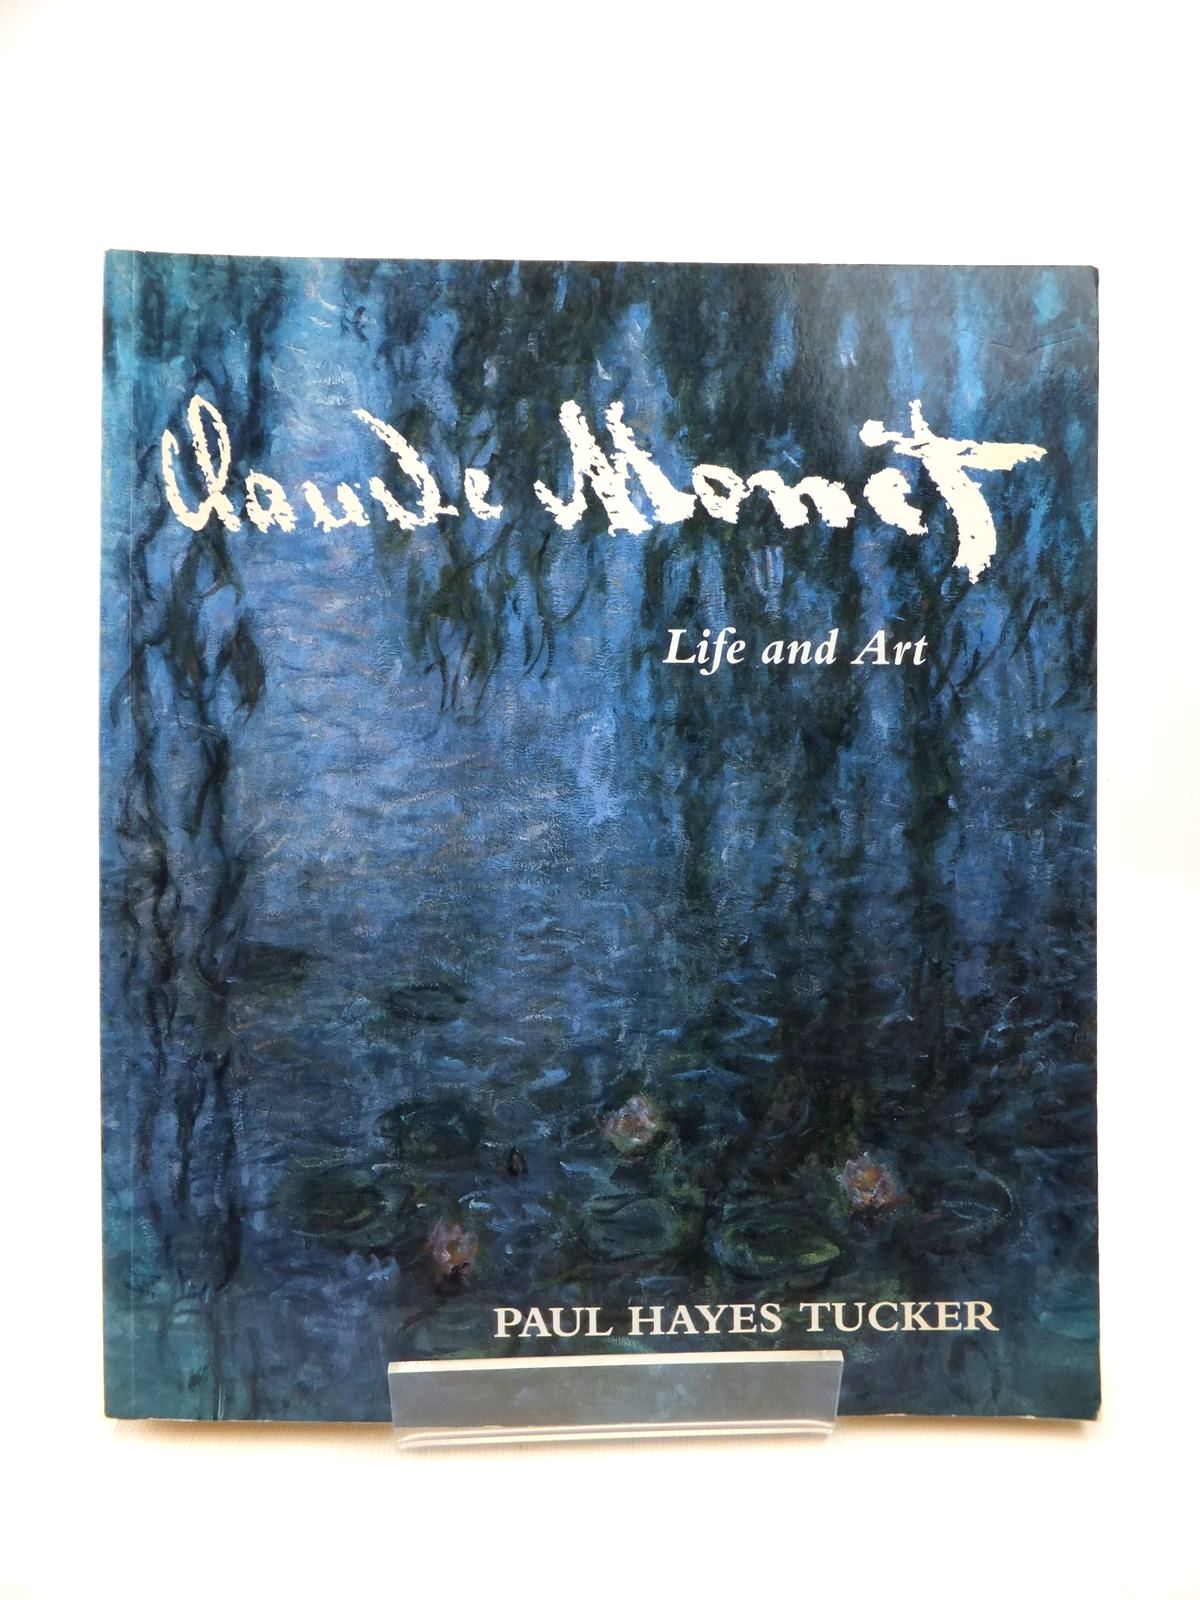 Photo of CLAUDE MONET: LIFE AND ART written by Tucker, Paul Hayes illustrated by Monet, Claude published by Yale University Press (STOCK CODE: 1815082)  for sale by Stella & Rose's Books